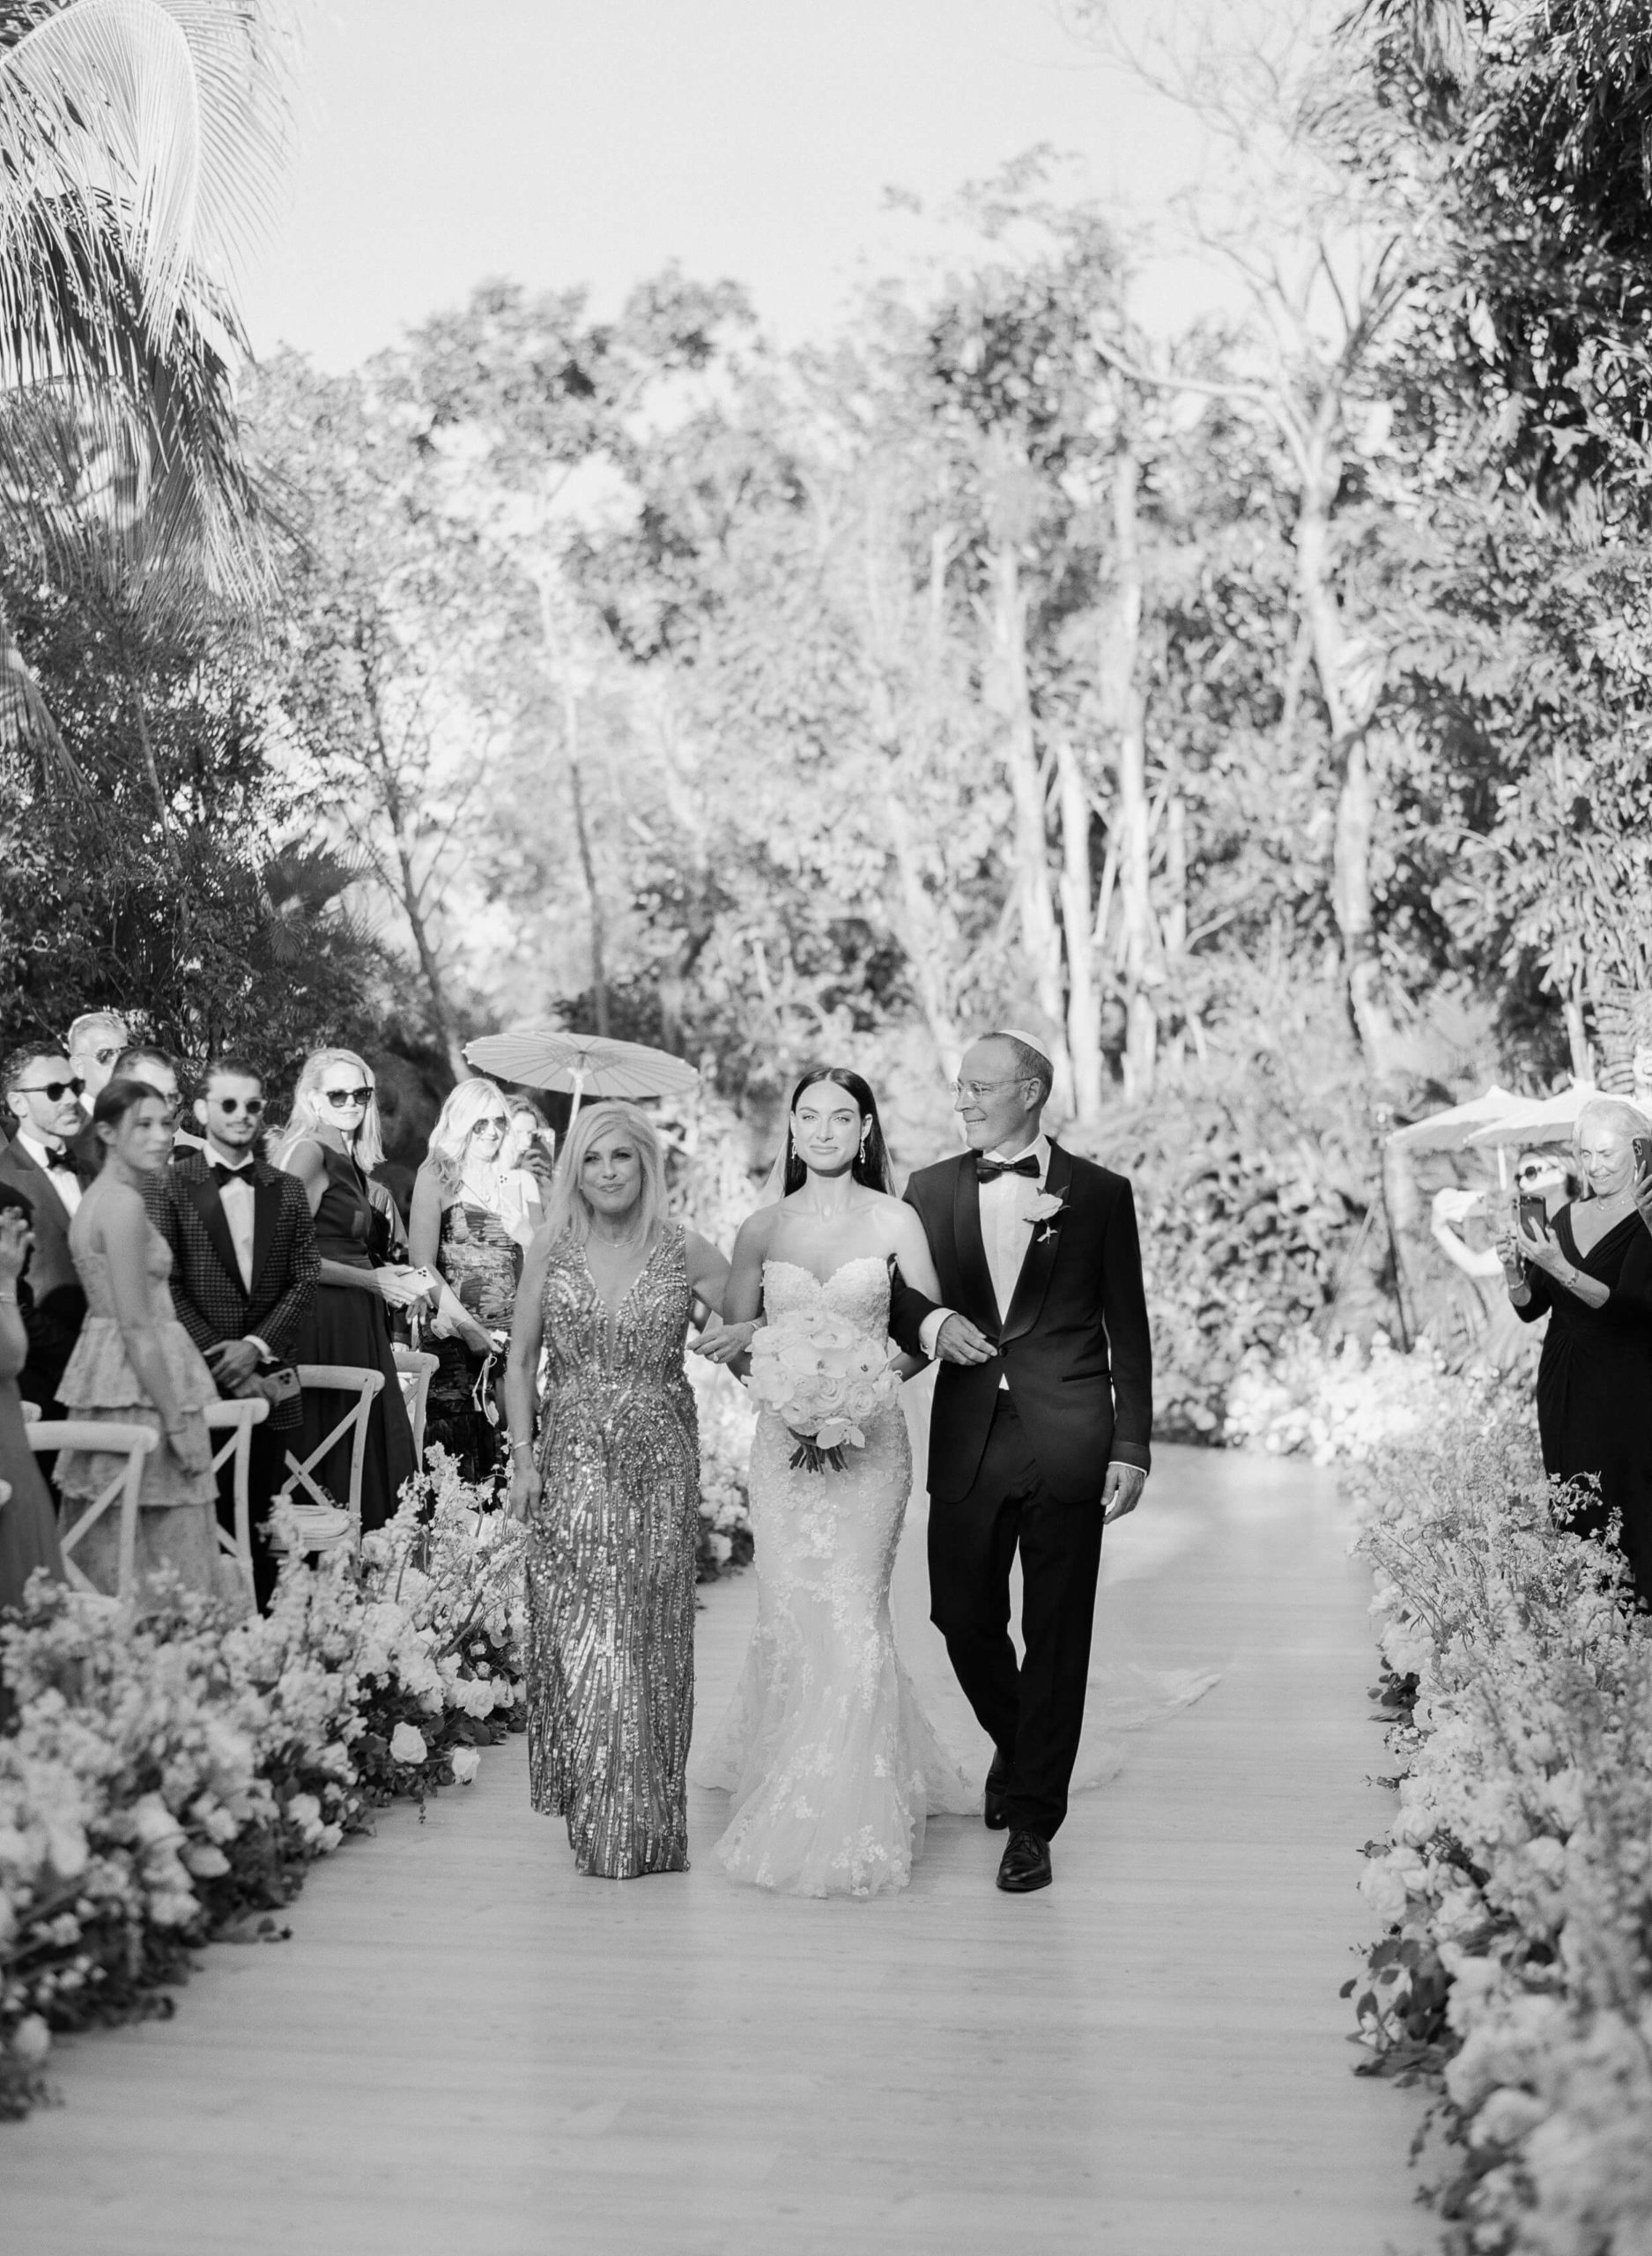 Danielle's parents walking her down the isle at her Rosewood Mayakoba wedding